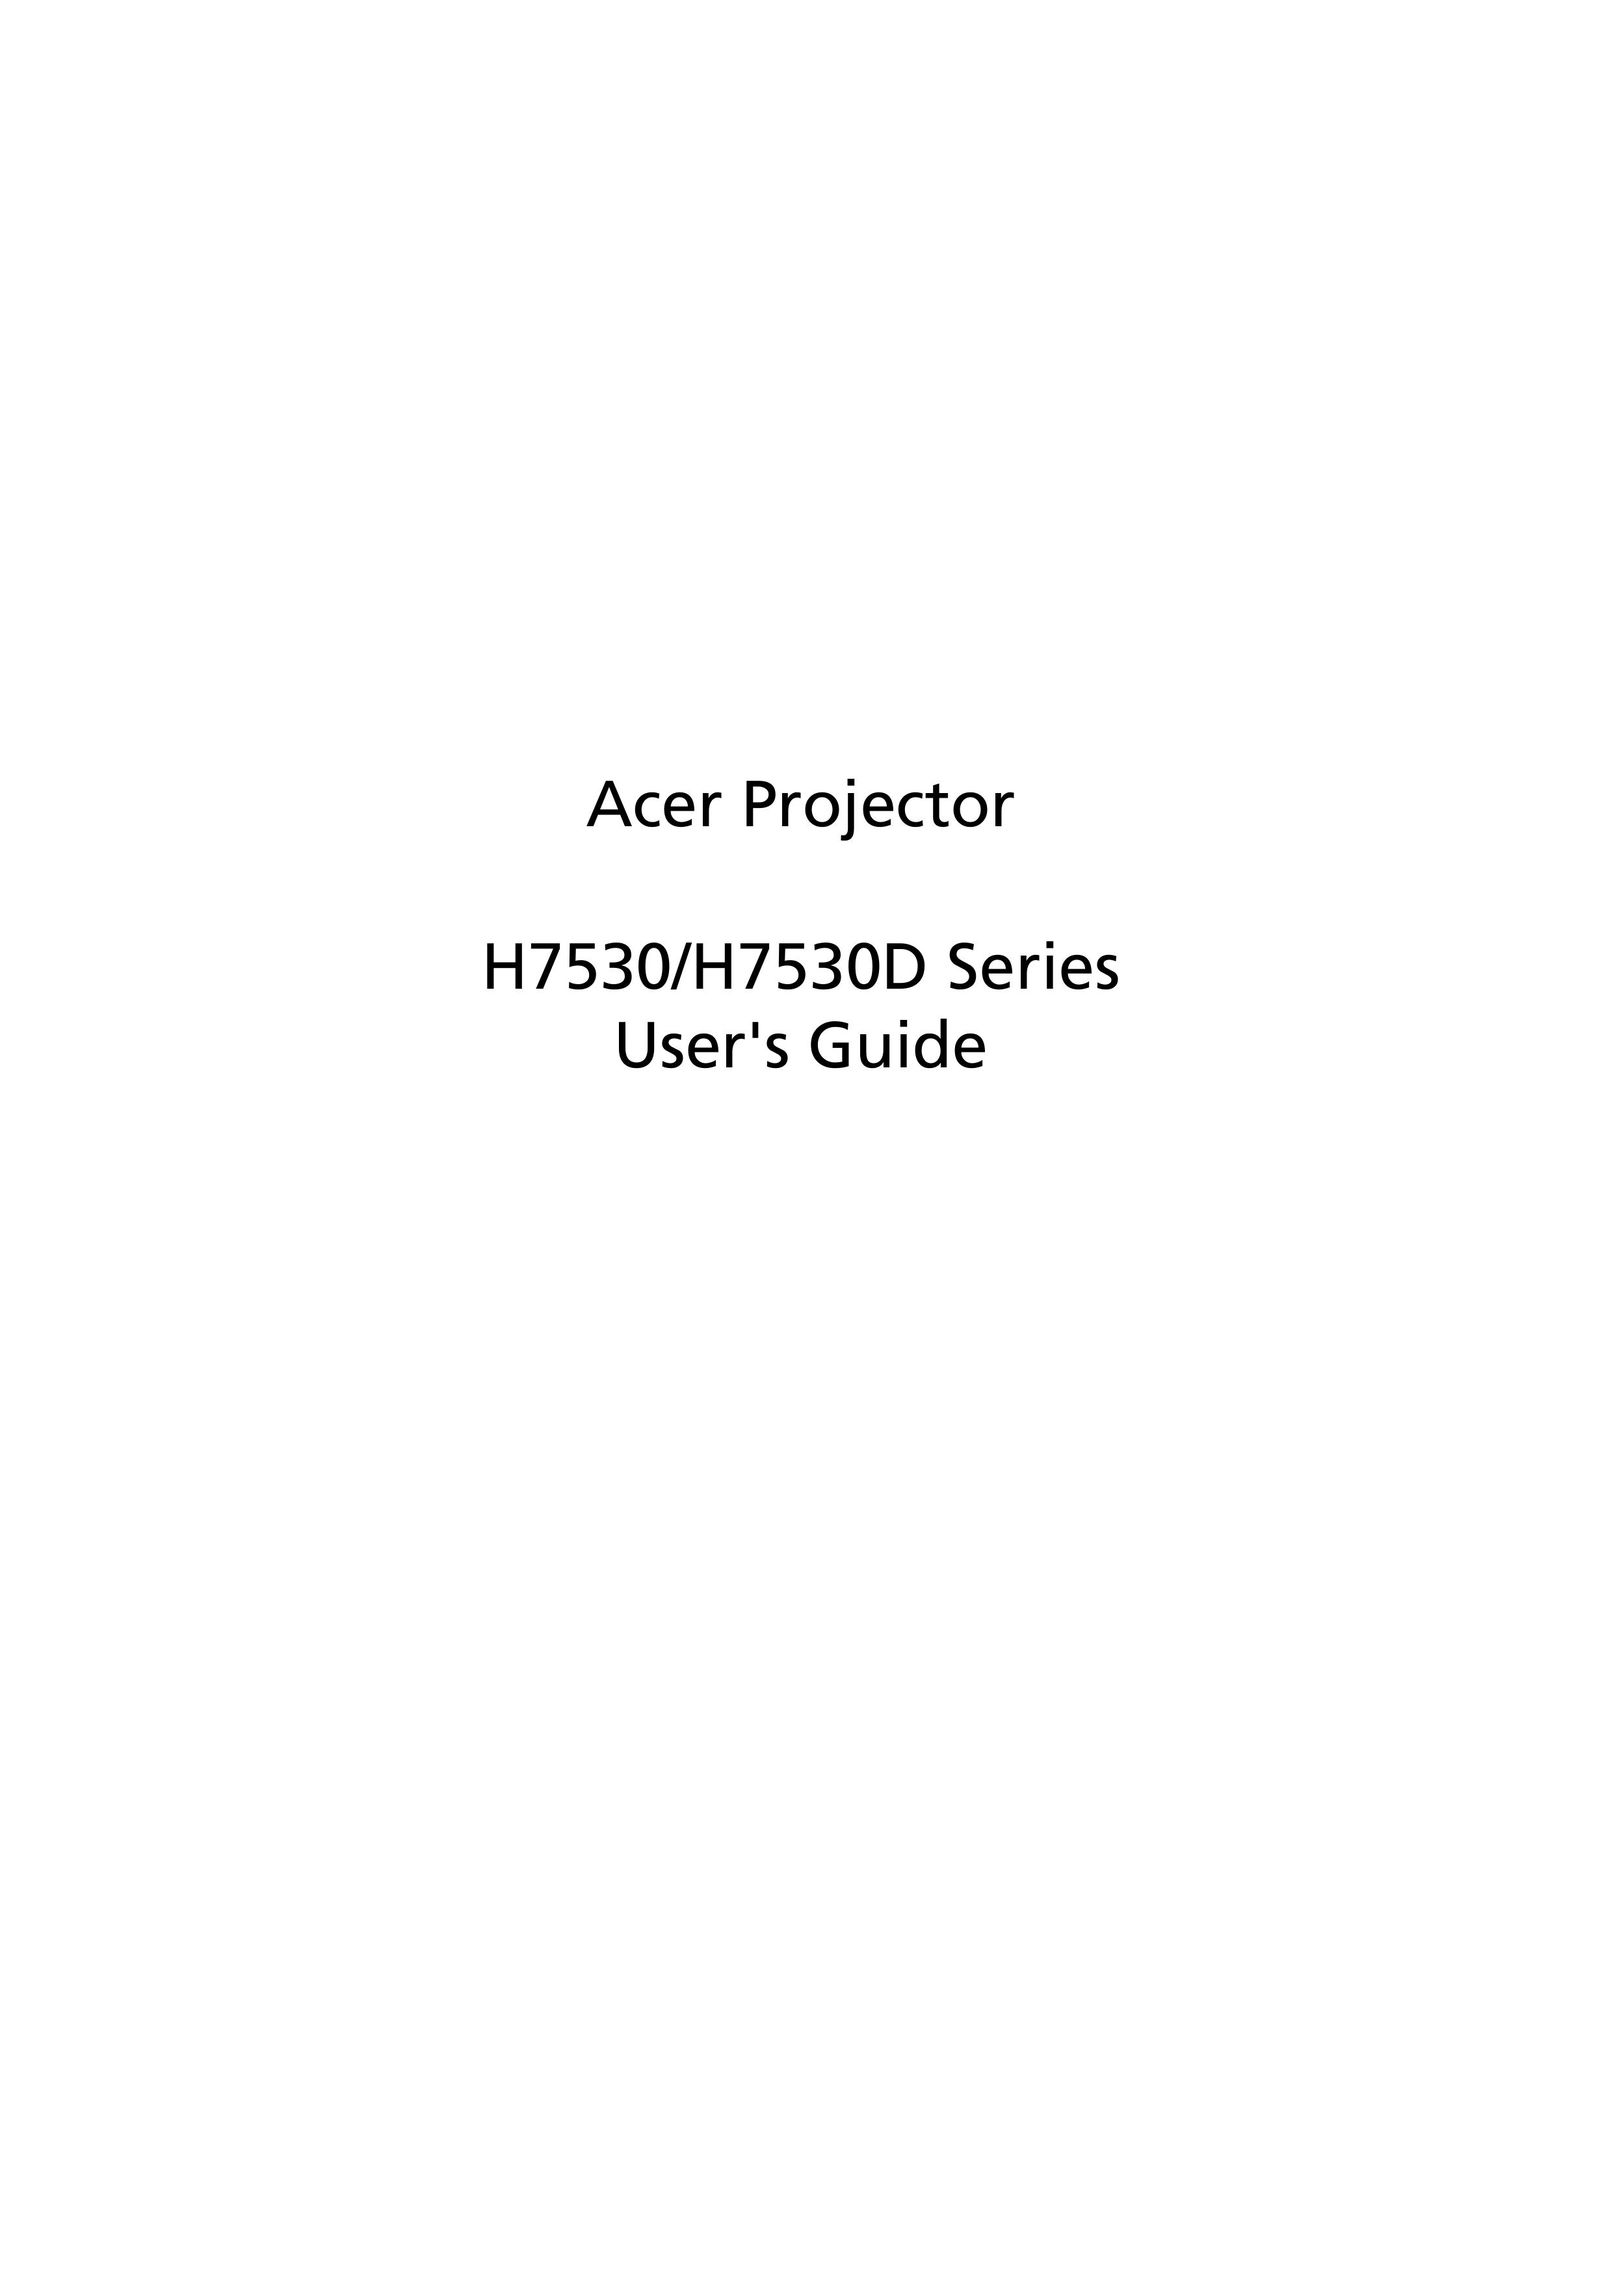 Acer H7530D Series Projector User Manual